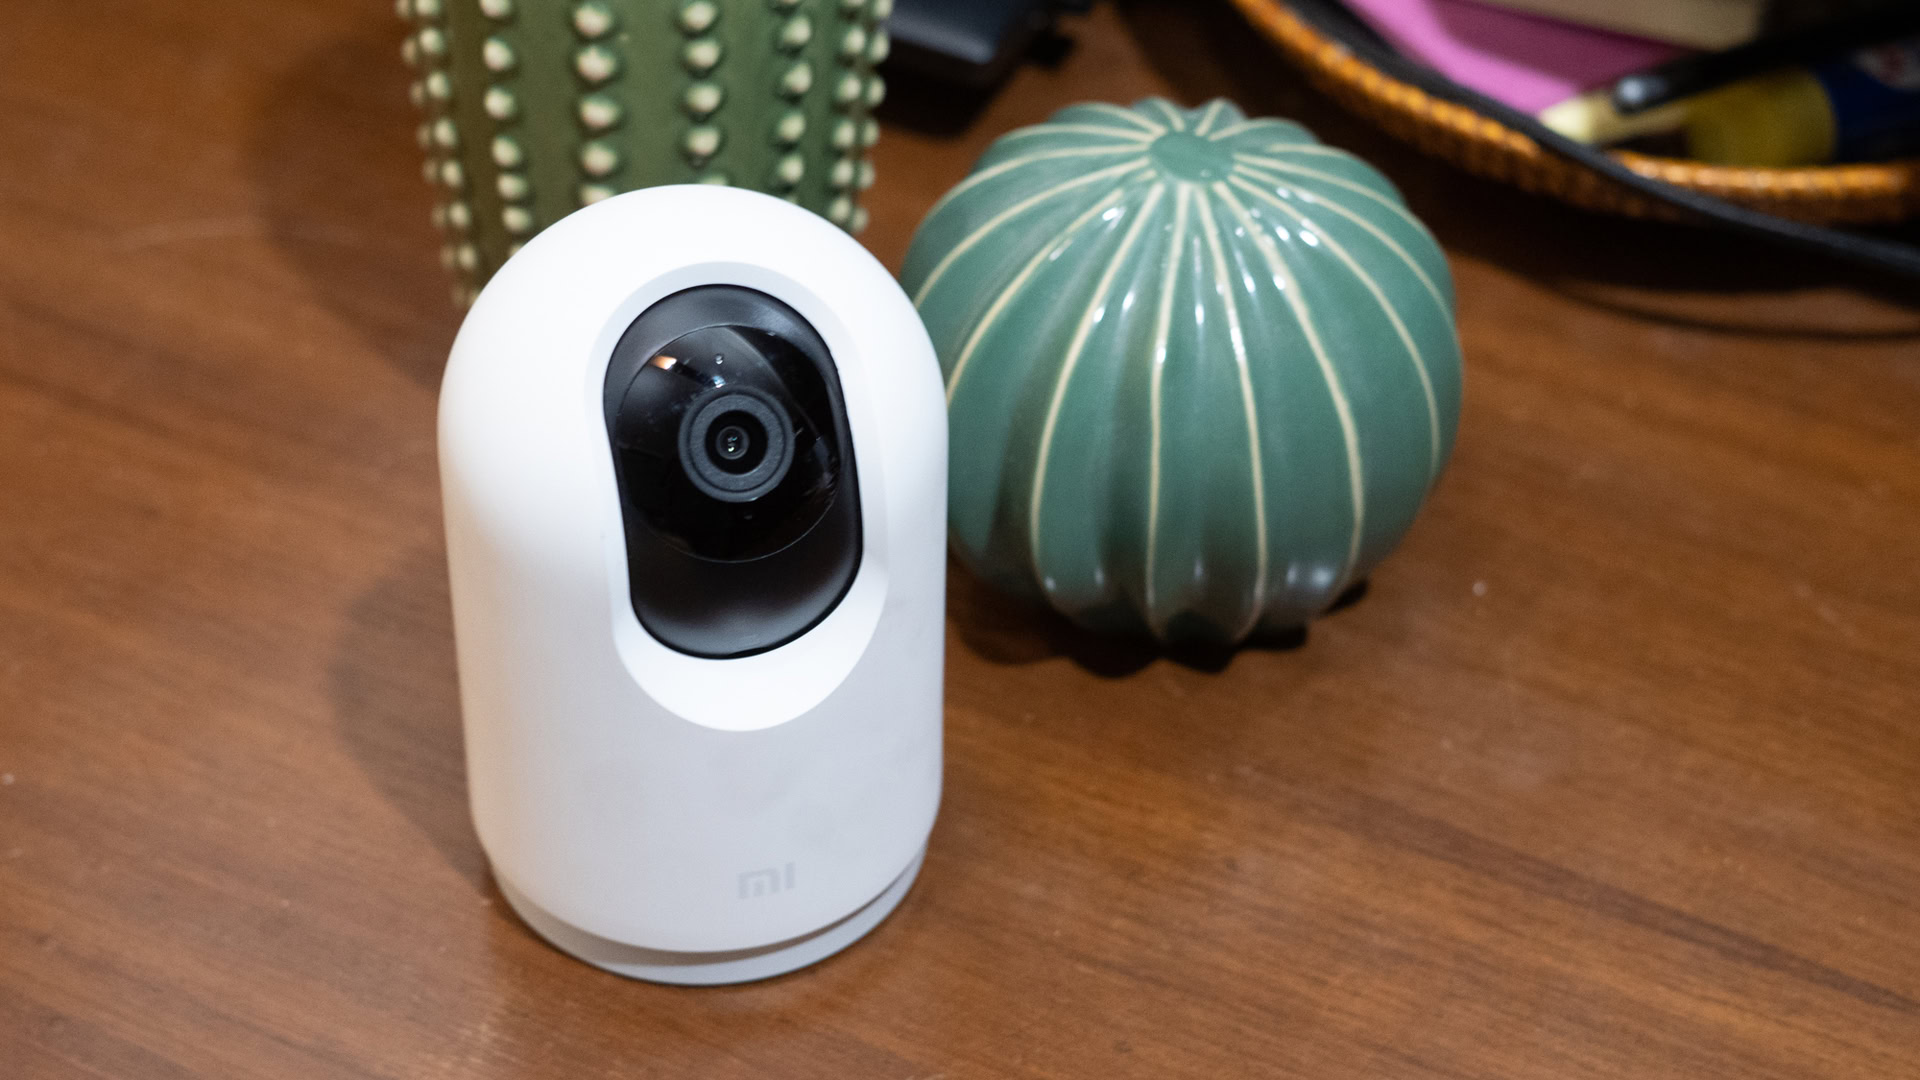 Xiaomi Mi 360 Home Security Camera 2K Pro review: All-round security and value